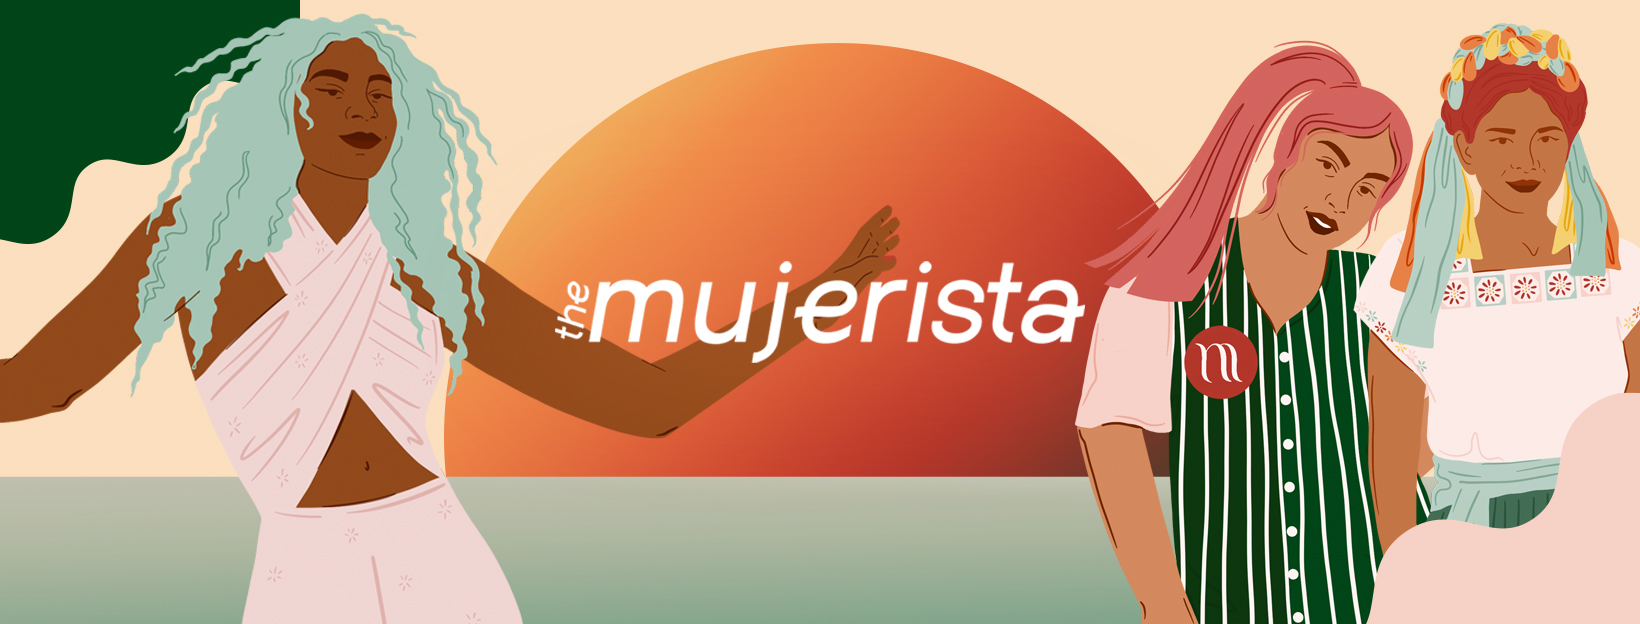 The-Mujerista-iFundWomen-Campaign-Banner